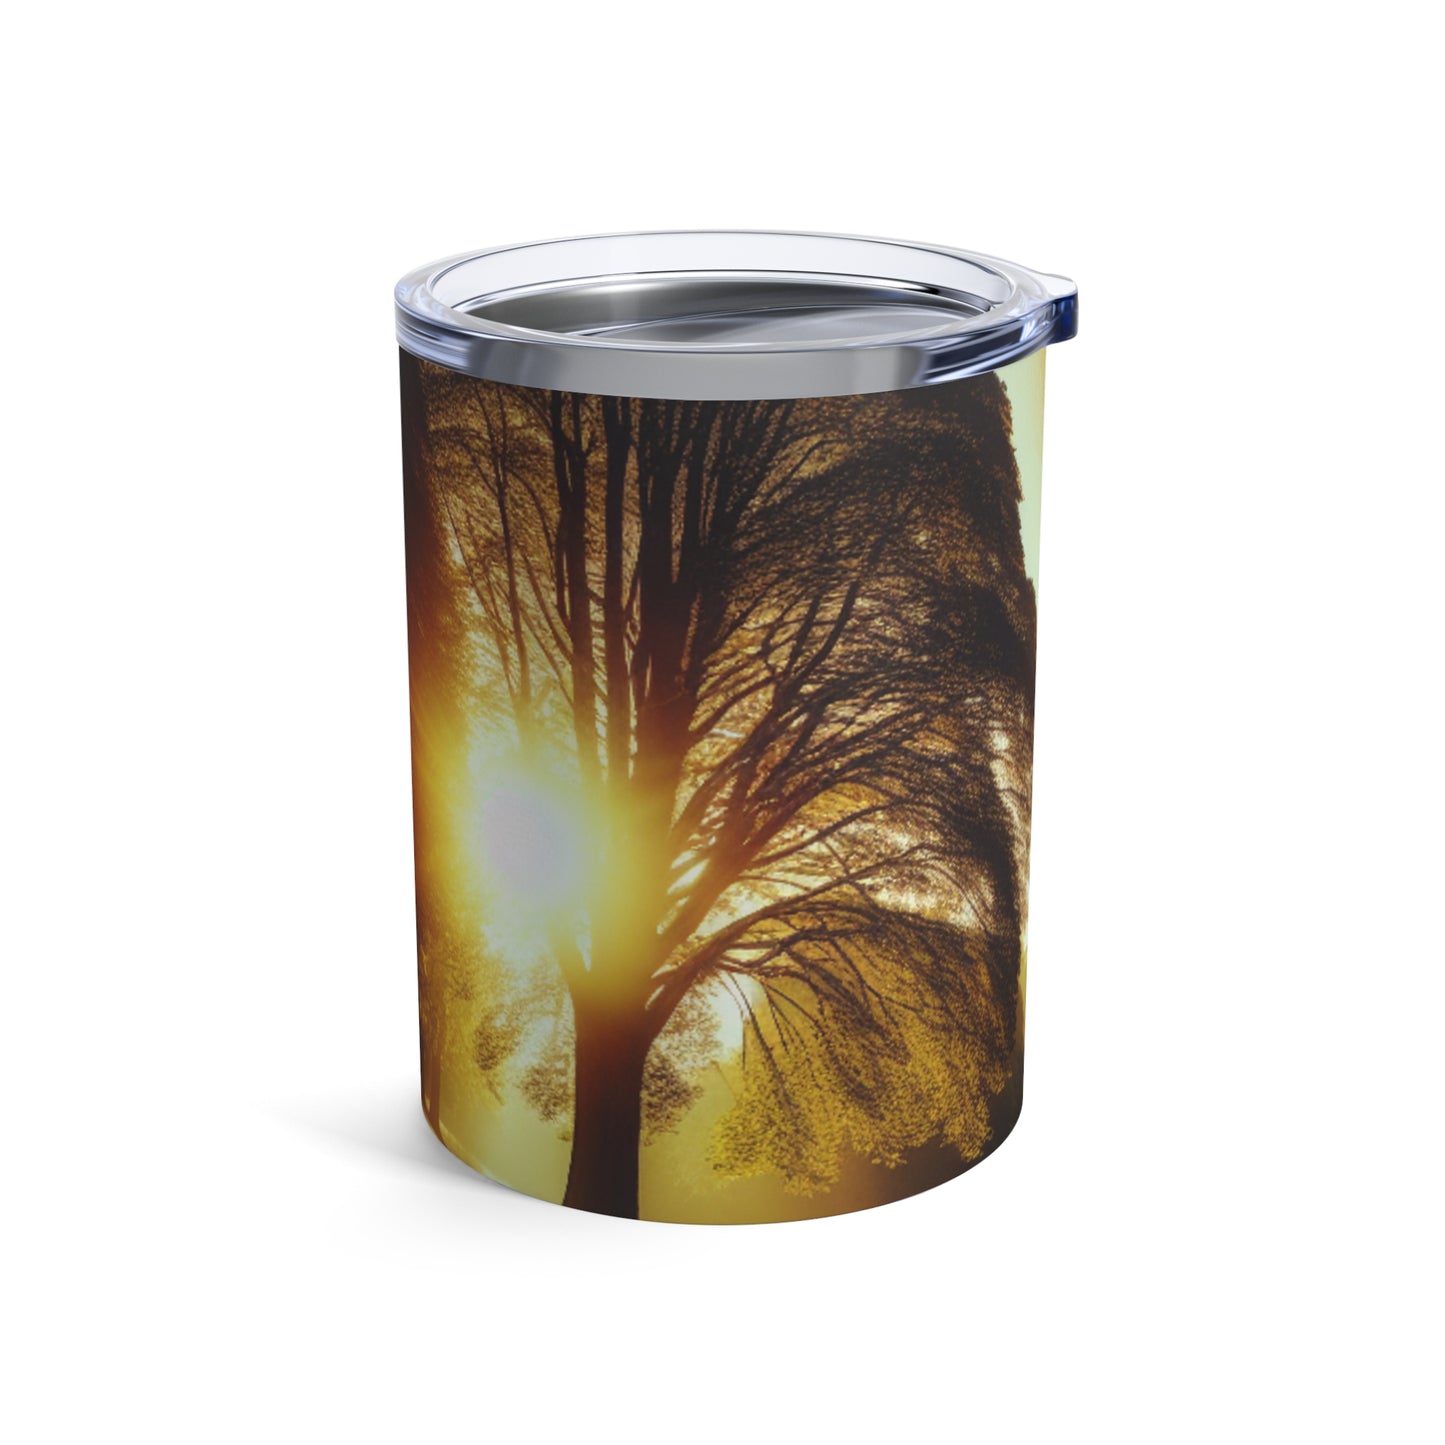 "Rebirth of the Forest: A Recycled Ecosystem" - The Alien Tumbler 10oz Environmental Art